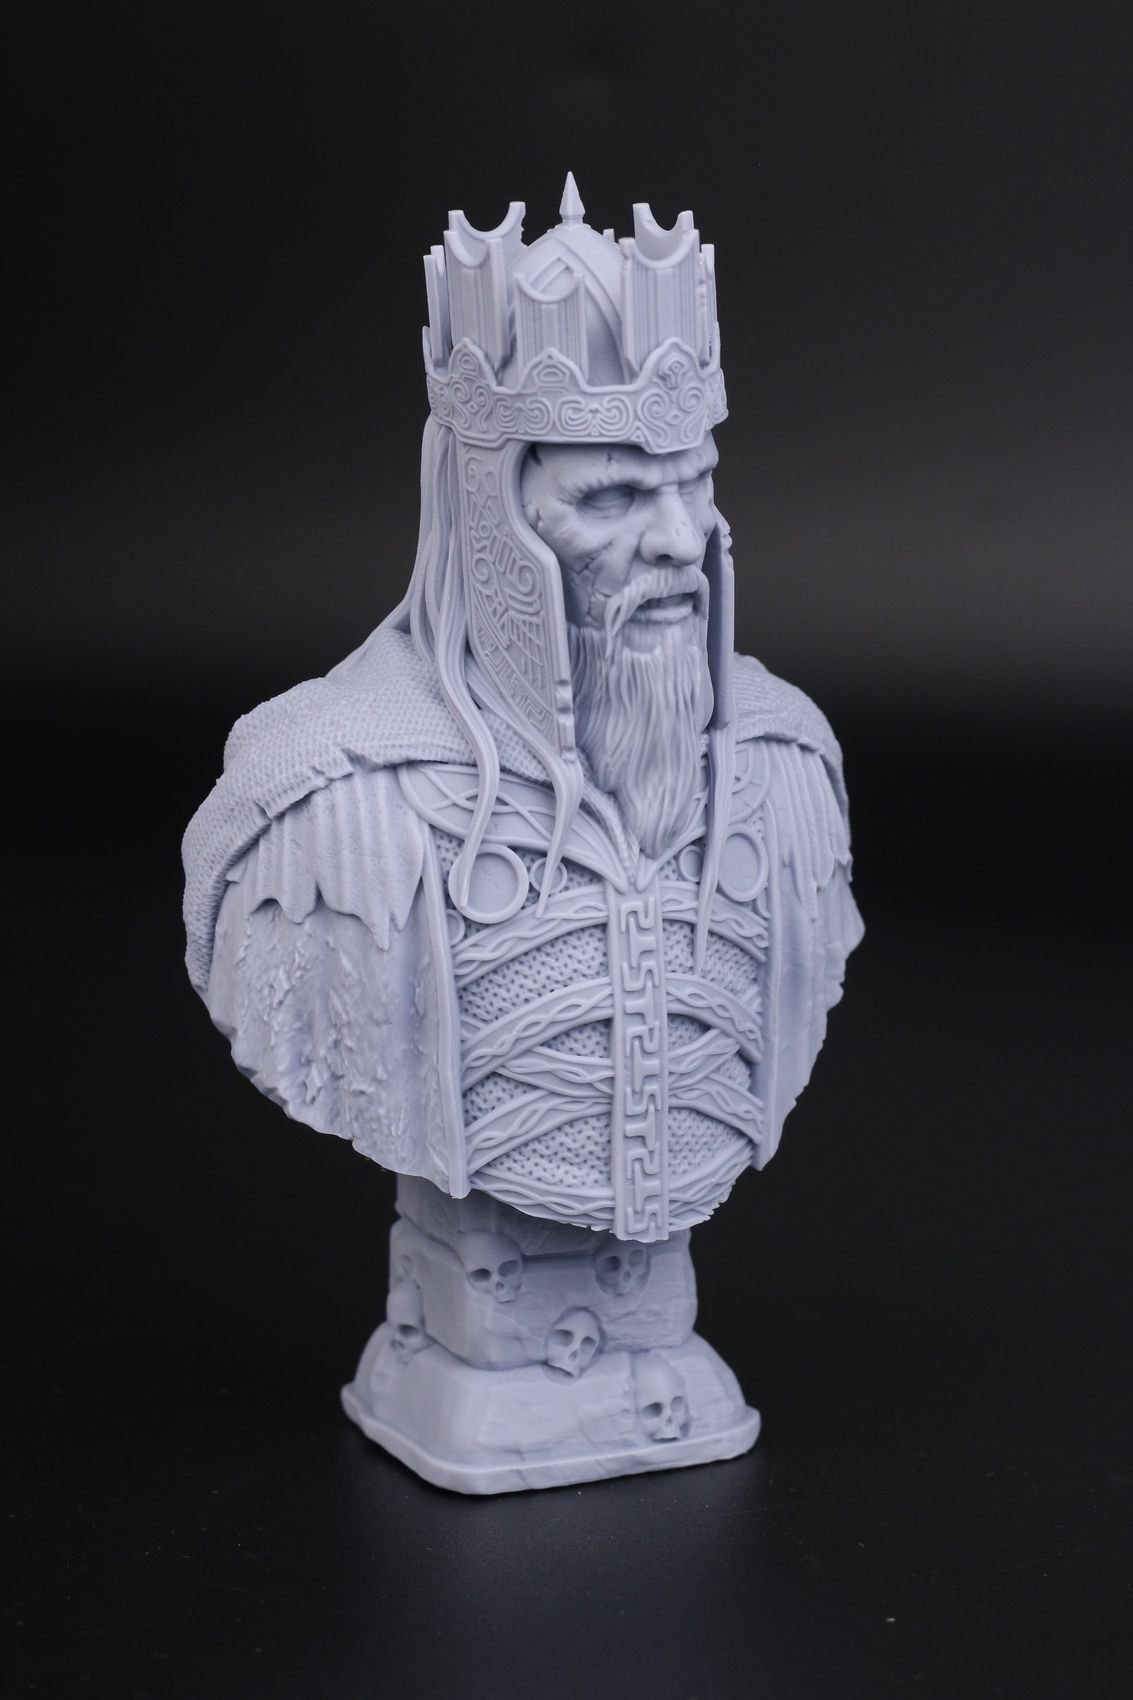 King of the Dead by Fotis Mint Anycubic Photon D2 Review2 | Anycubic Photon D2 Review: DLP Resin 3D Printer